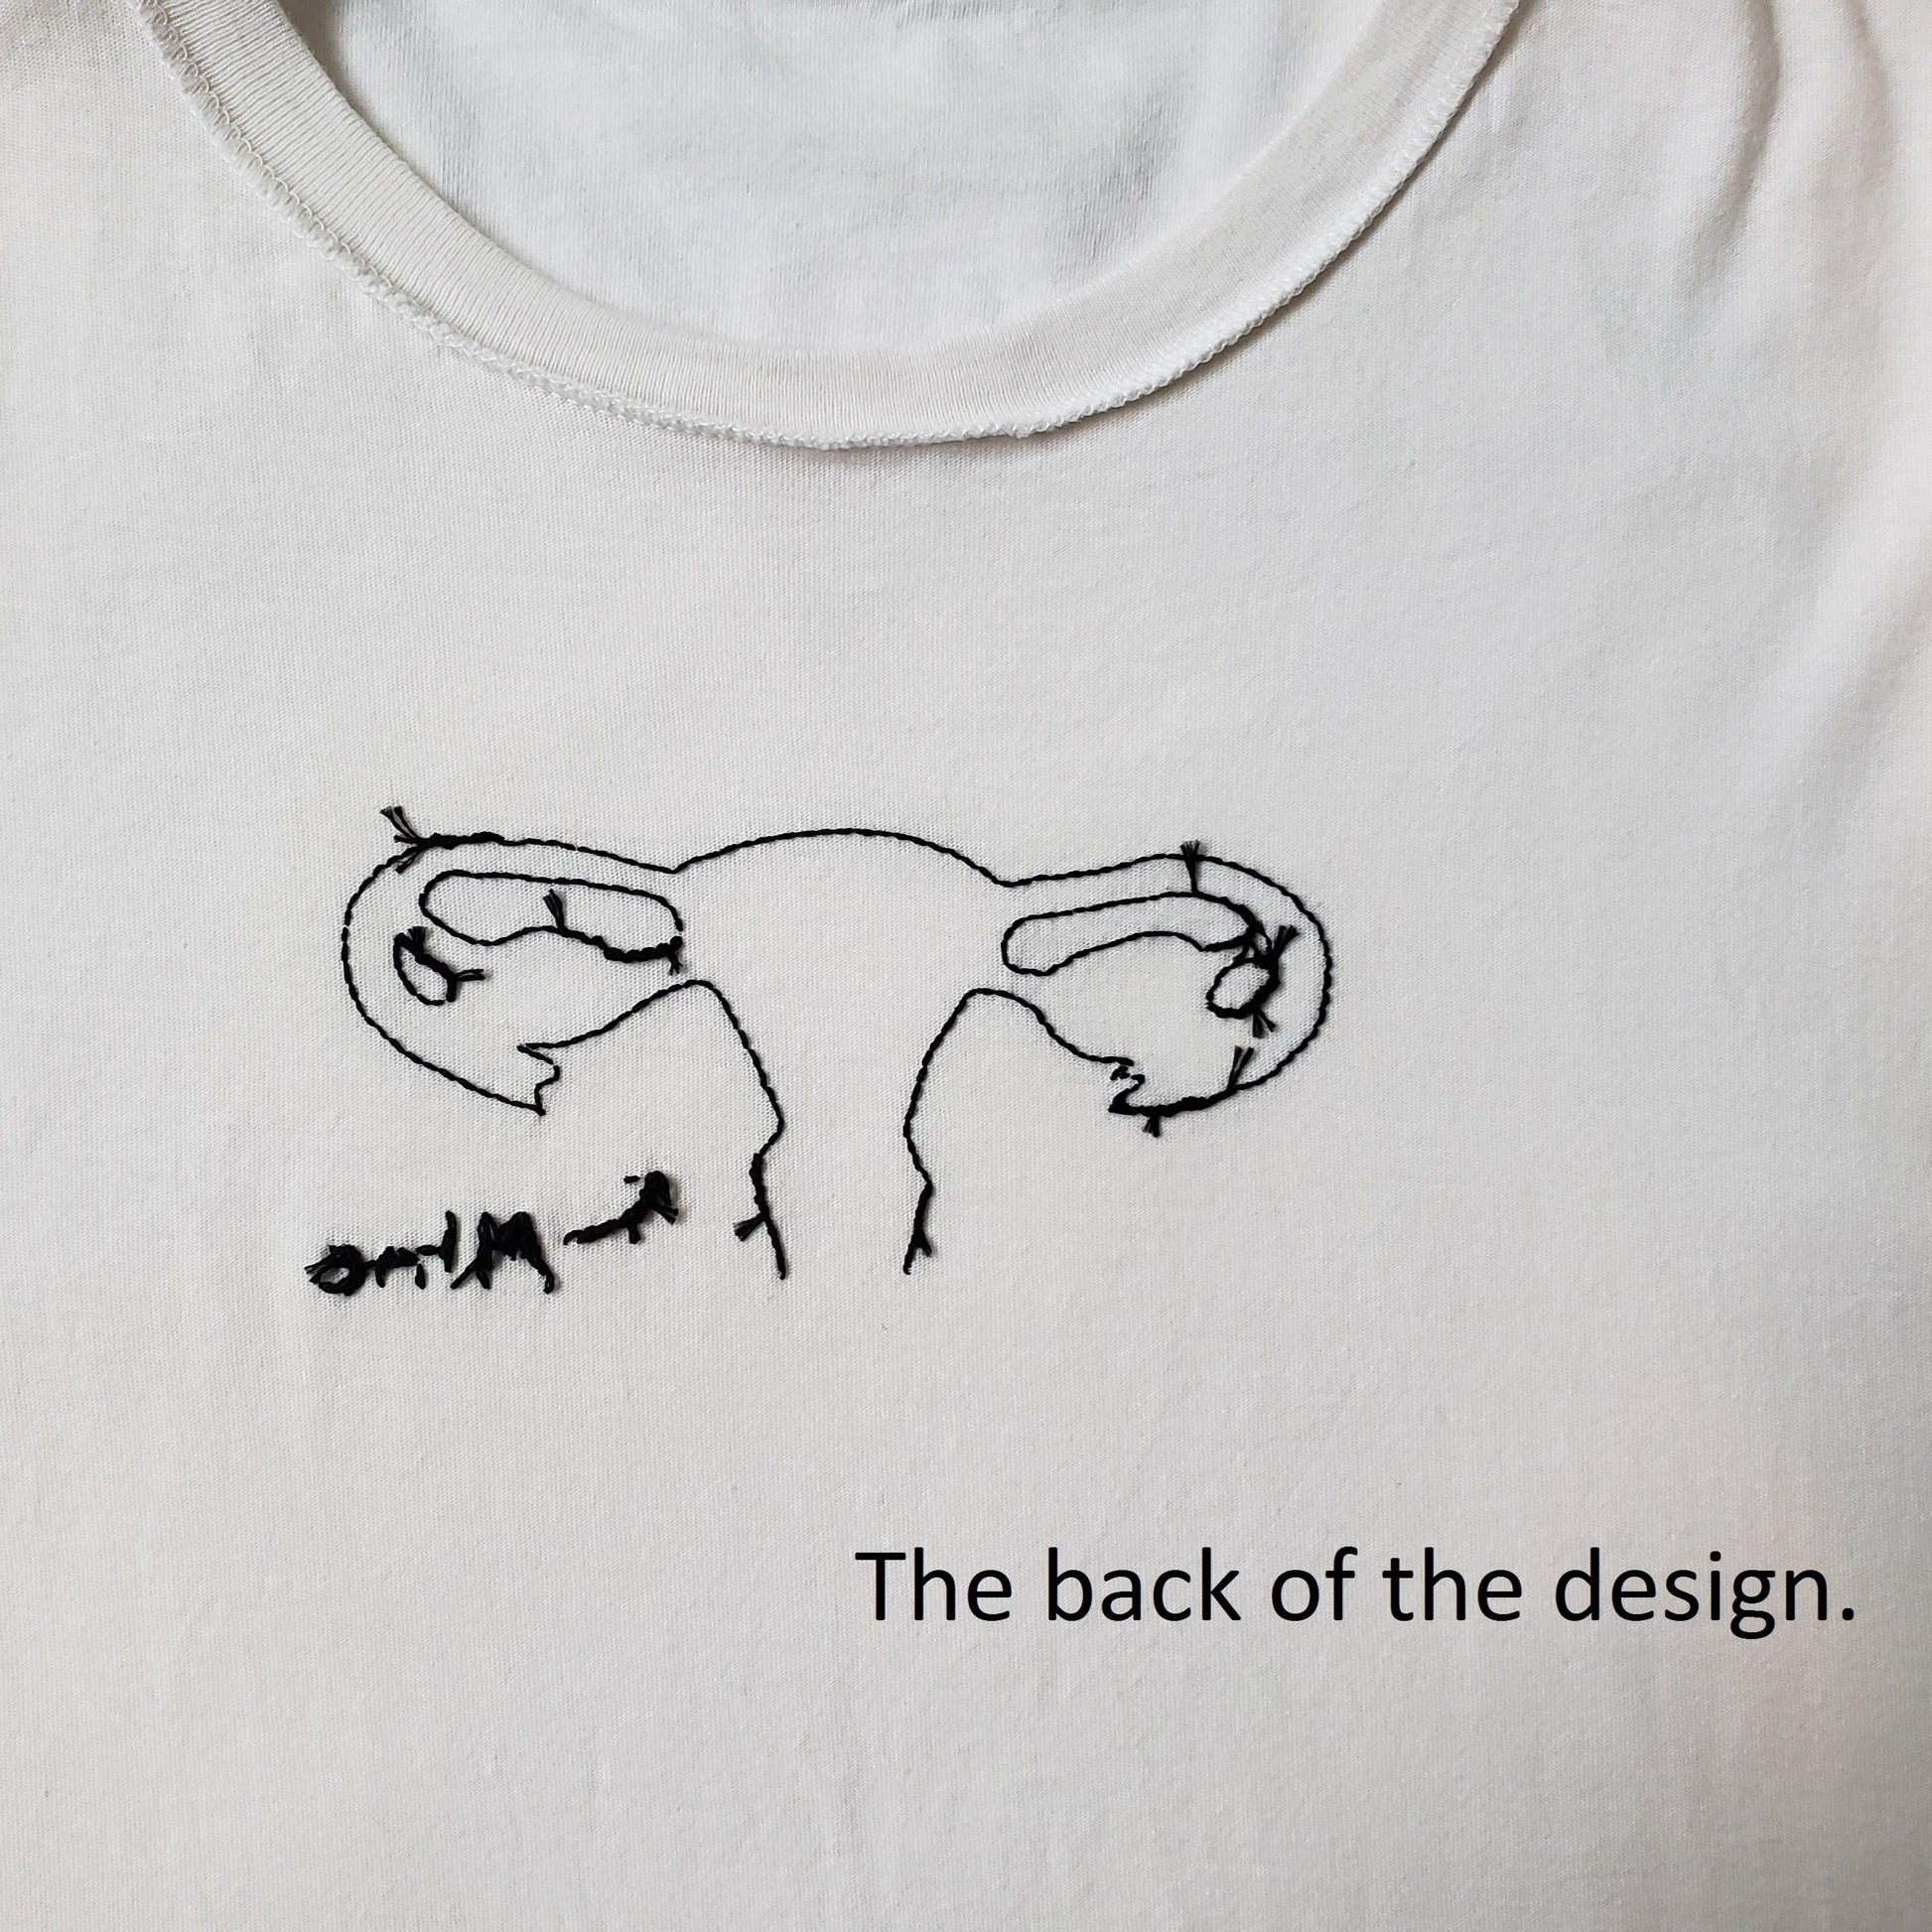 The back of the design. You can see the uterus is nice and tidy, and that "mine" looks much thicker because it is a different stitch.